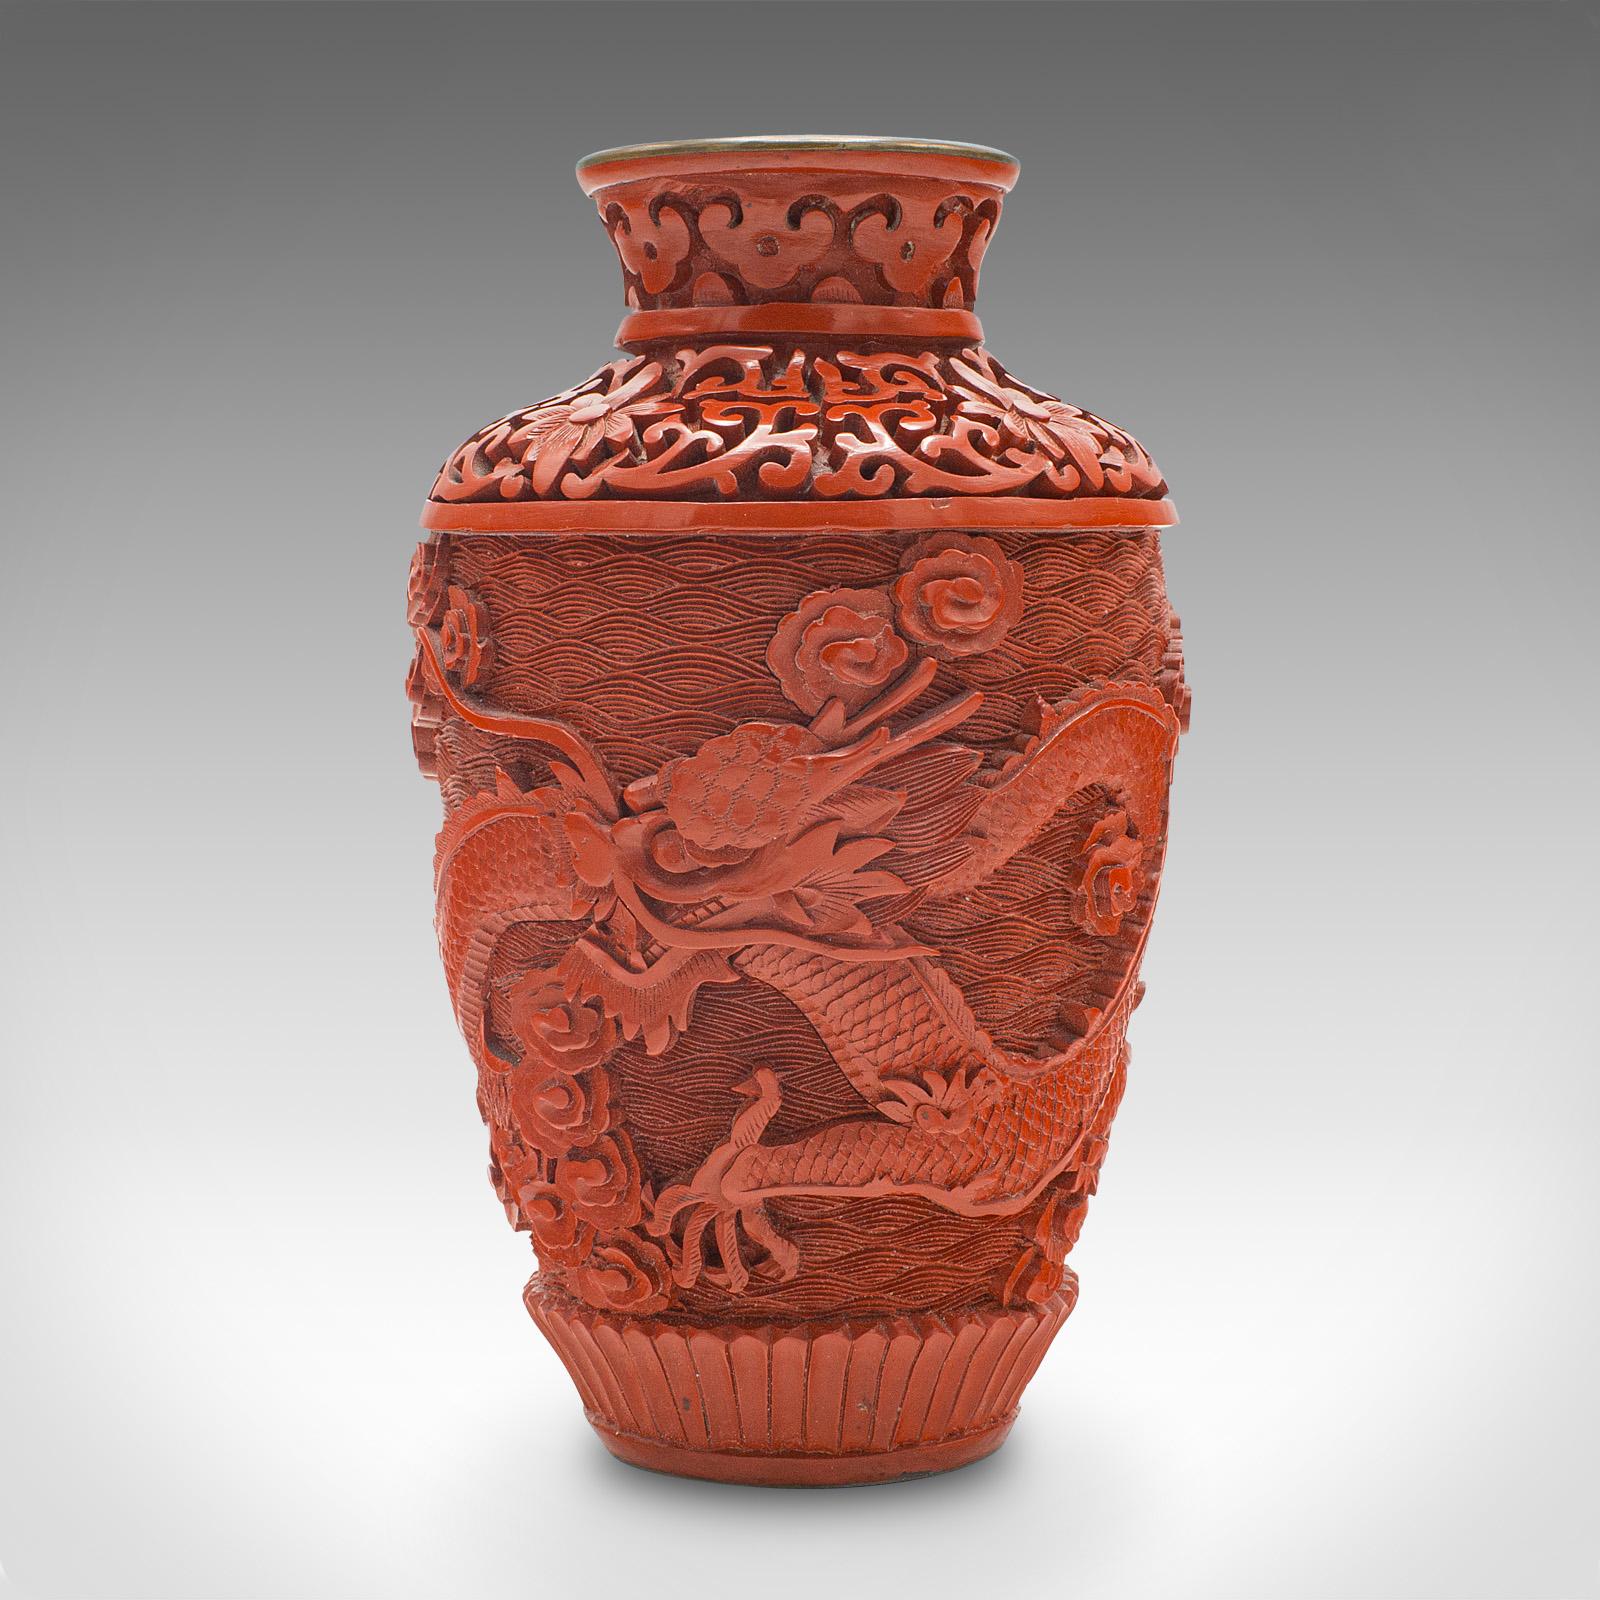 This is a small vintage cinnabar posy vase. A Chinese, carved decorative urn with cloisonné interior, dating to the mid 20th century, circa 1950.

Striking fusion of two traditional Oriental art forms
Displays a desirable aged patina and in good